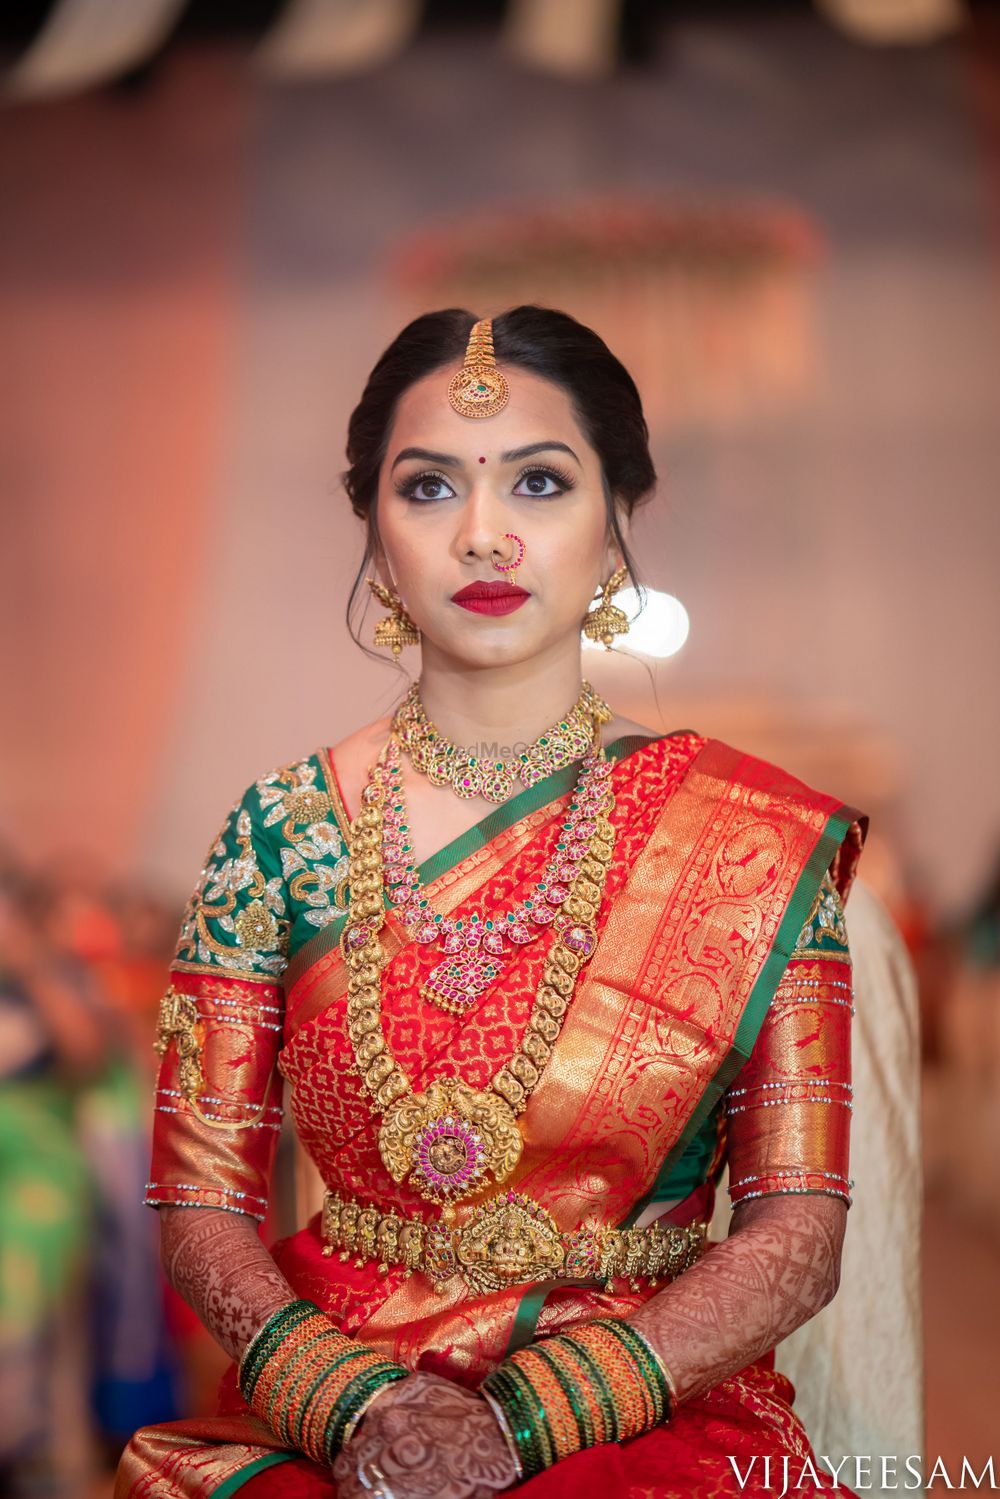 Photo of Bride in orange and green saree with layered temple jewellery